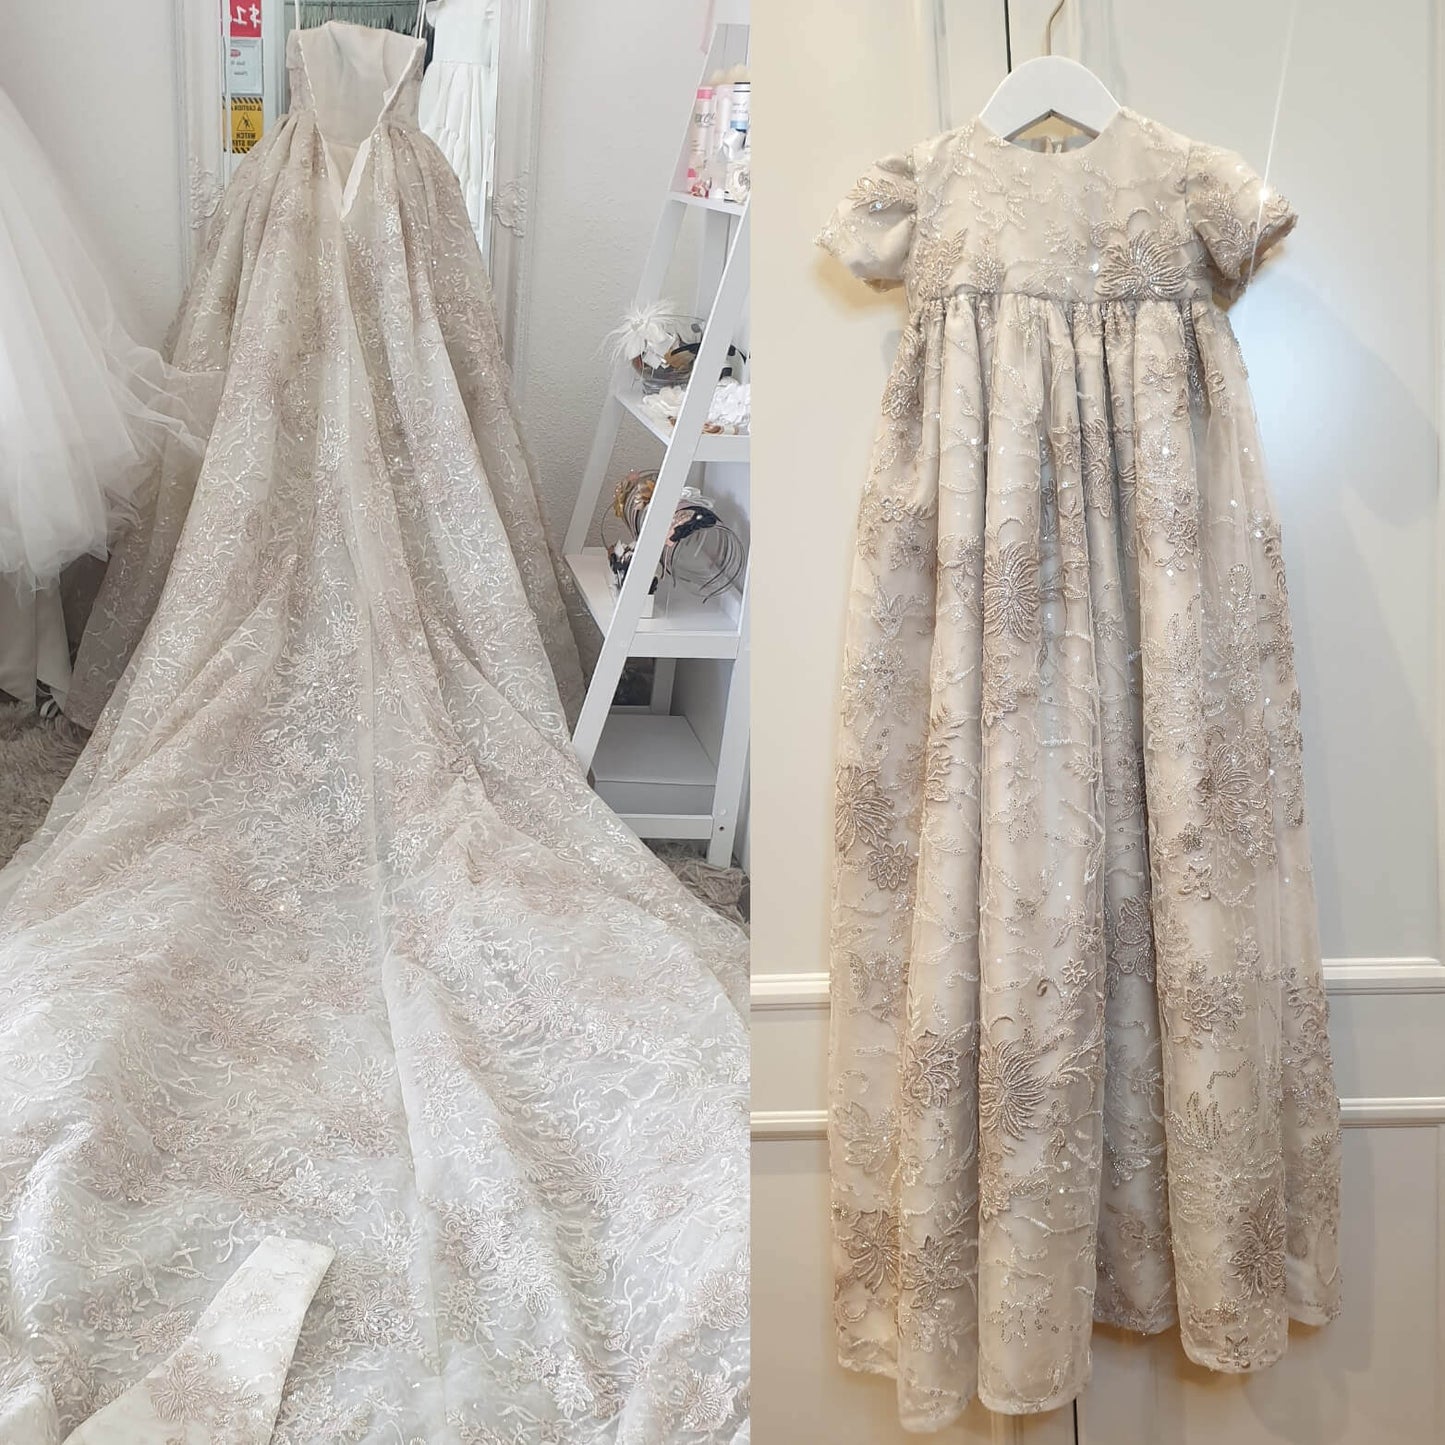 Heirloom christening gowns are made in Melbourne